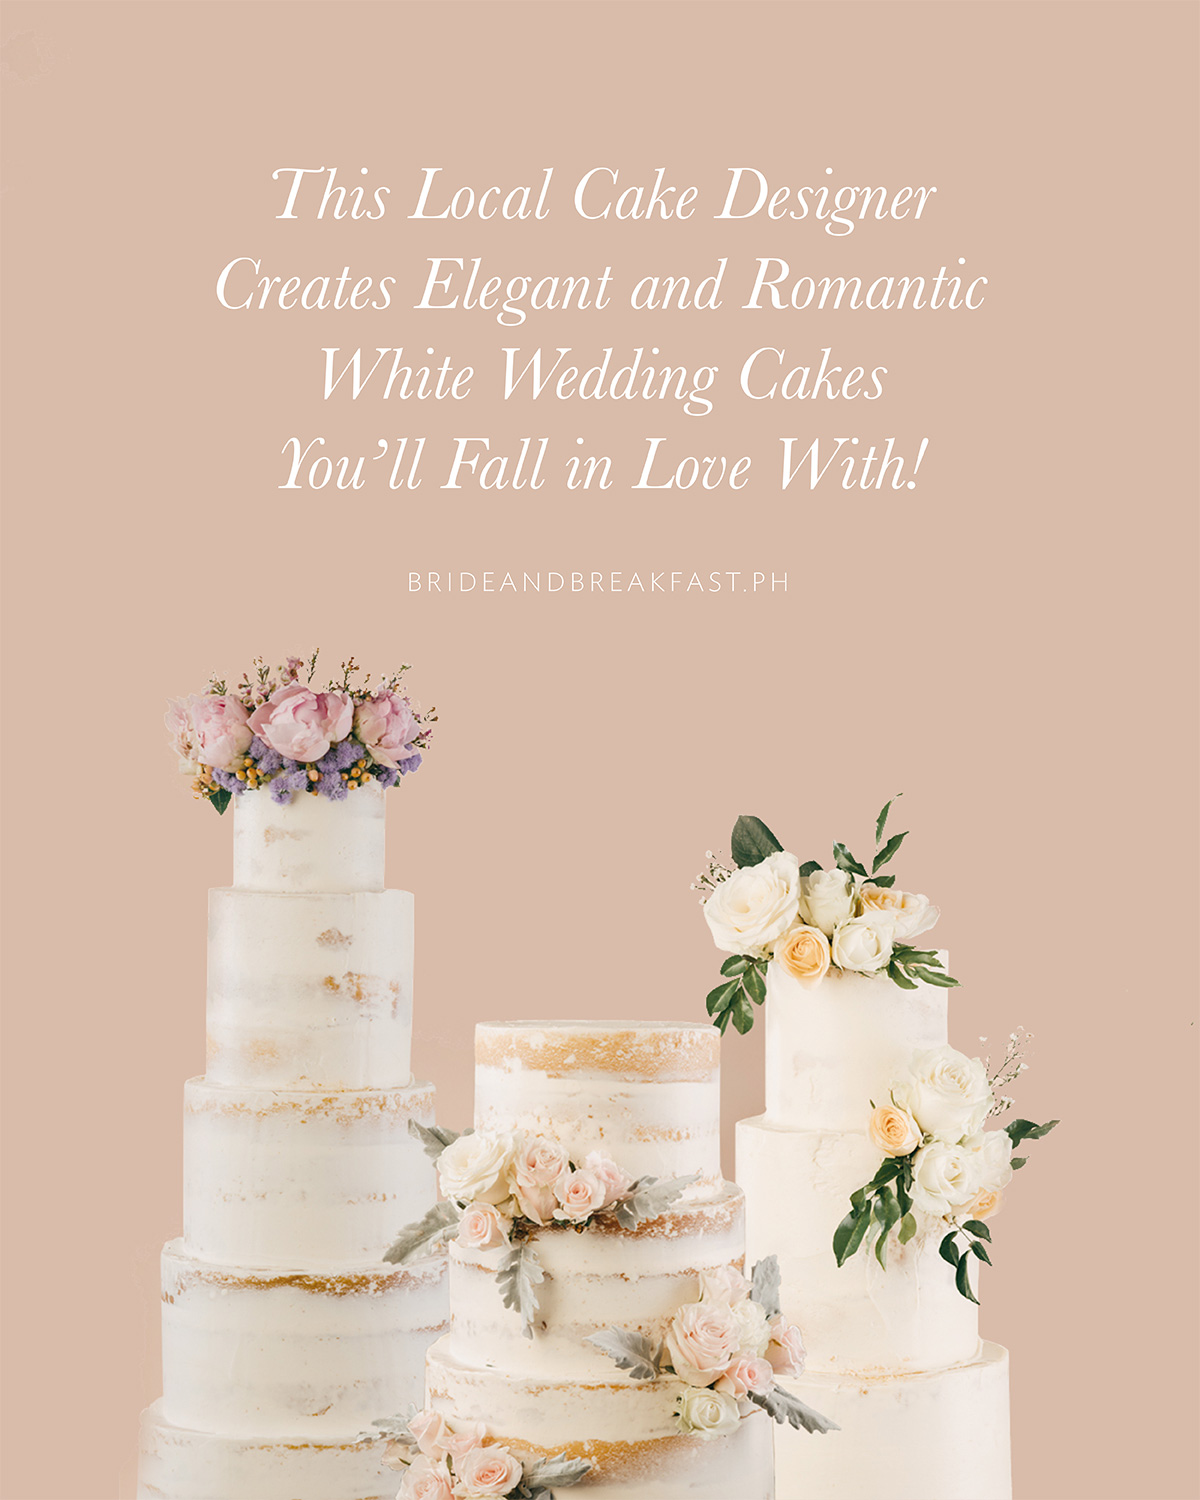 This Local Cake Designer Creates Elegant and Romantic White wedding Cakes You'll Fall in Love With!